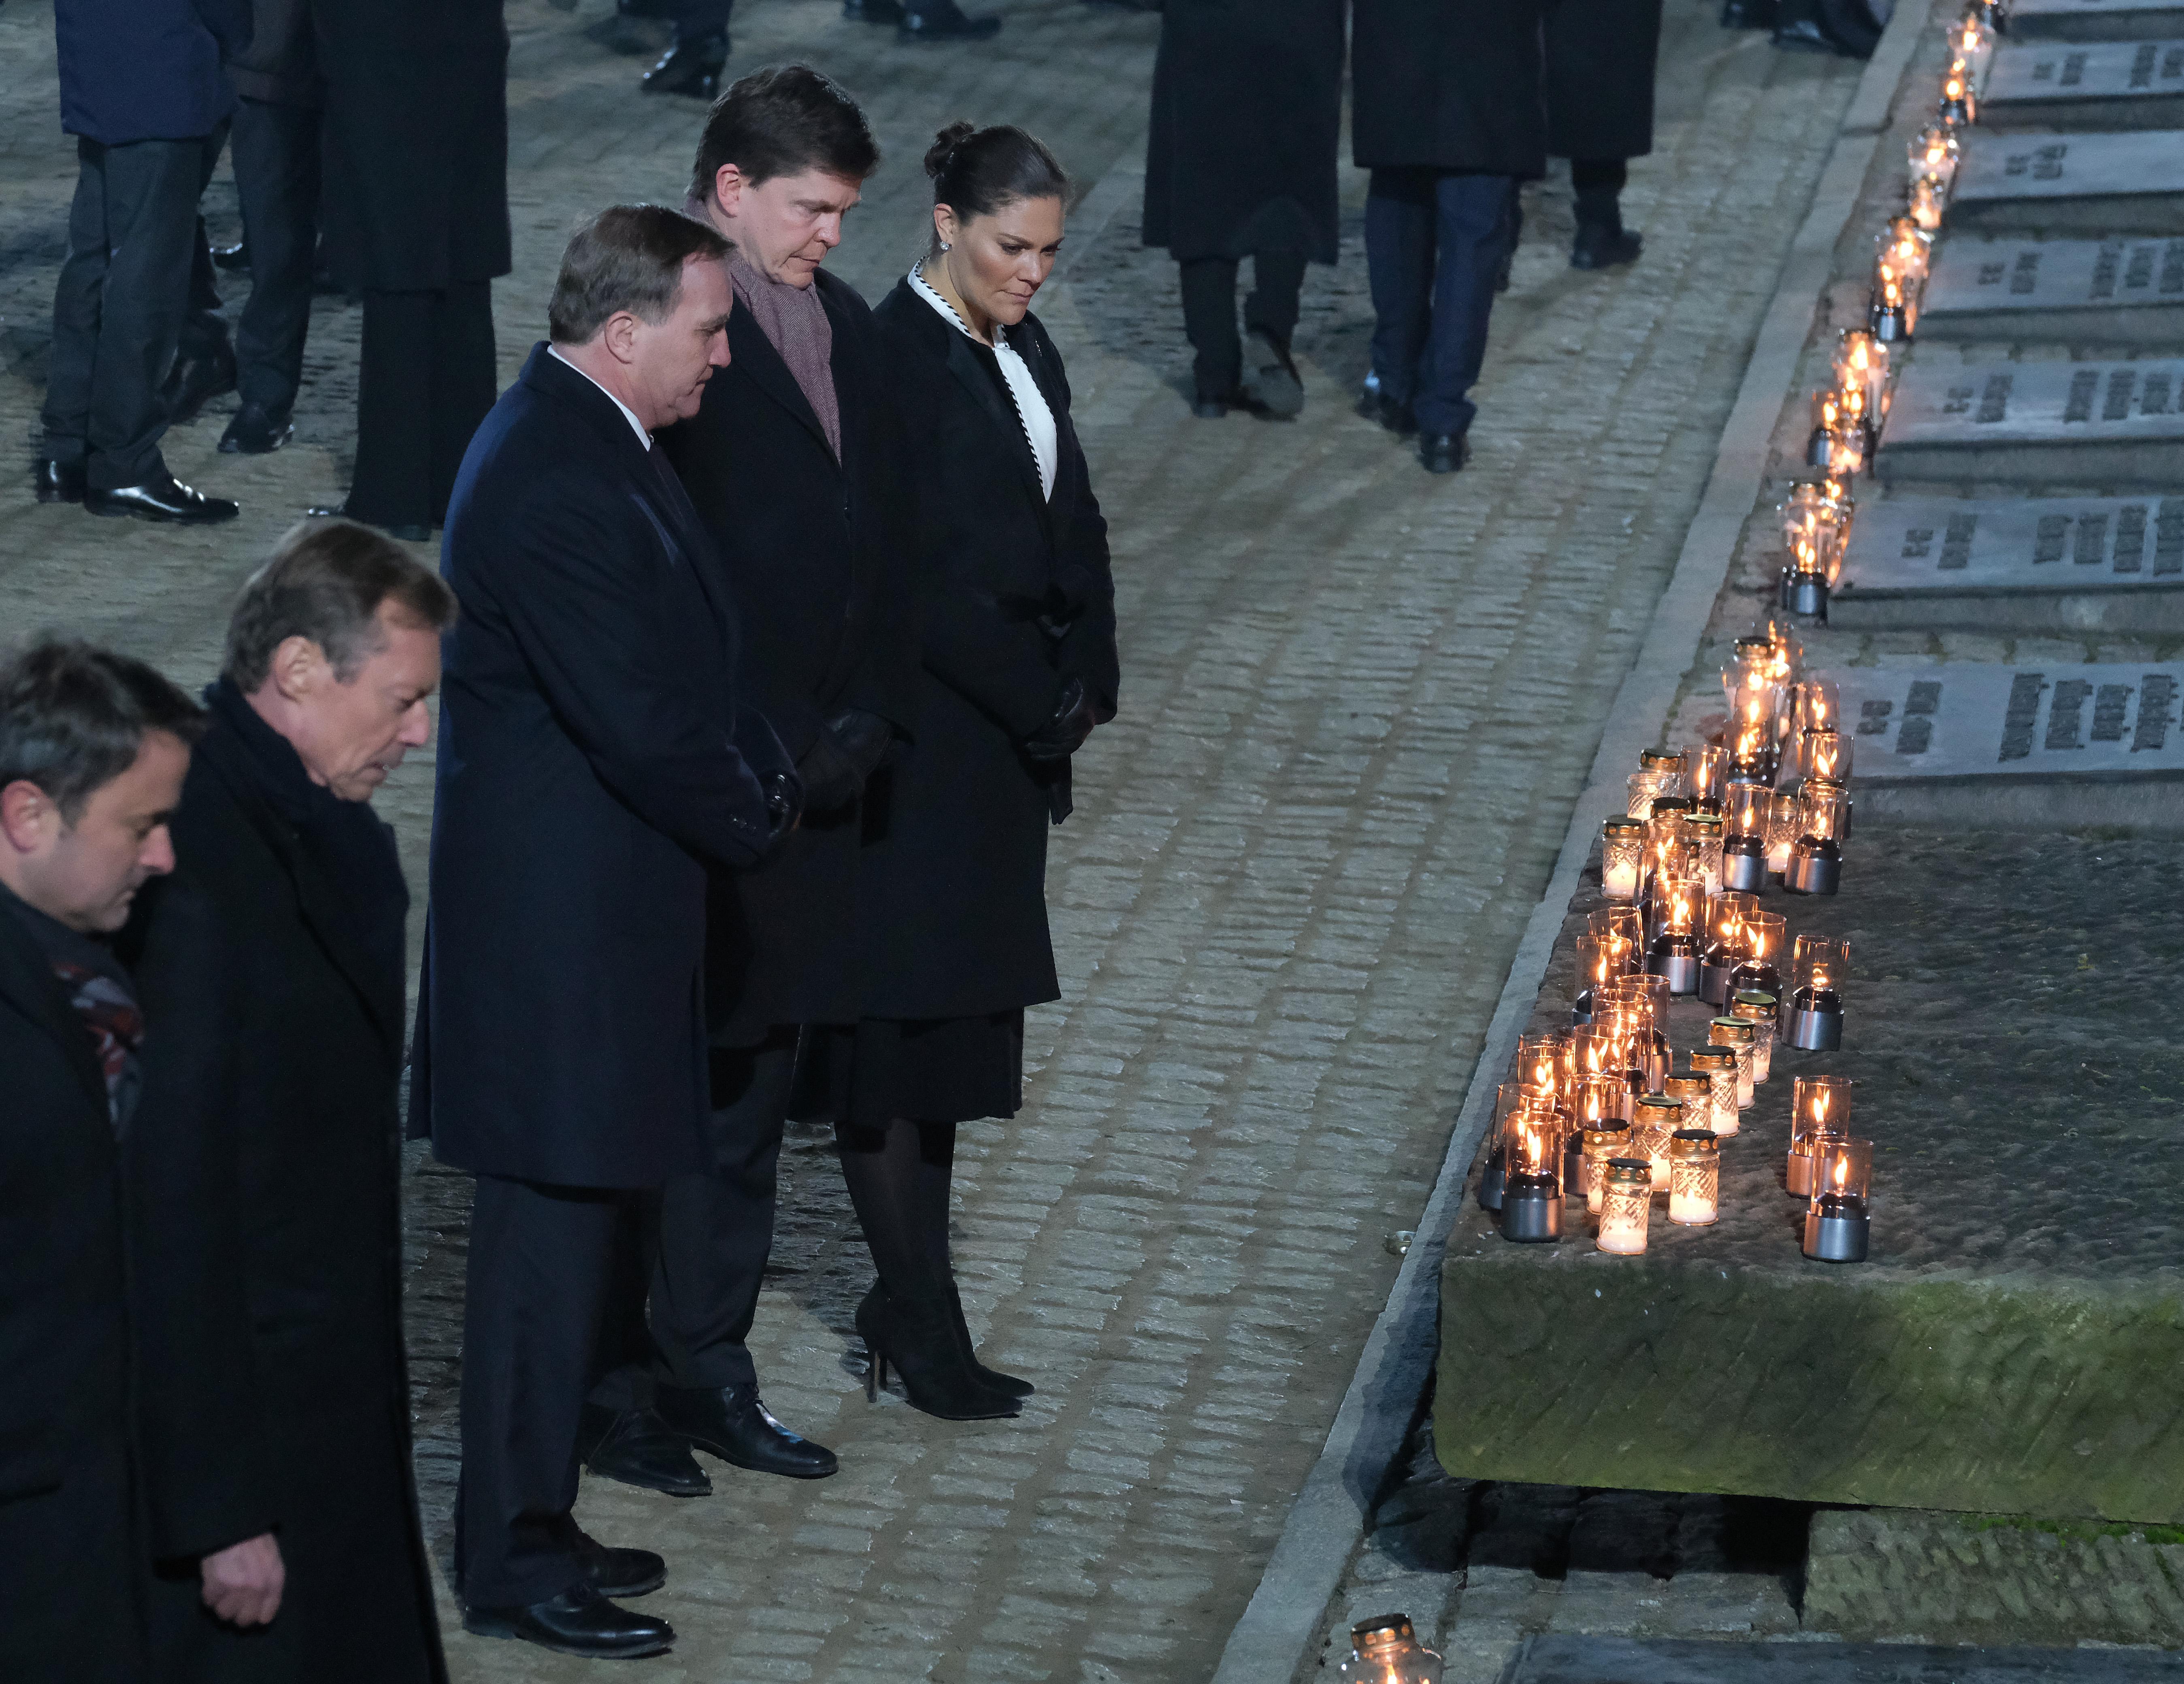 OSWIECIM, POLAND - JANUARY 27: Swedish Crown Princess Victoria, Swedish Prime Minister Stefan Löfven and her husband Prince Daniel look at candles at the Auschwitz Memorial during the official ceremony to mark the 75th anniversary of the liberation of the Auschwitz concentration camp at the Auschwitz-Birkenau site on January 27, 2020 near Oswiecim, Poland. International leaders as well as approximately 200 survivors and their families are gathering today at Auschwitz today to attend the commemoration. The Nazis killed an estimated one million people at the camp during the World War II occupation of Poland by Nazi Germany. The Soviet Army liberated the camp on January 27, 1945. (Photo by Sean Gallup/Getty Images)